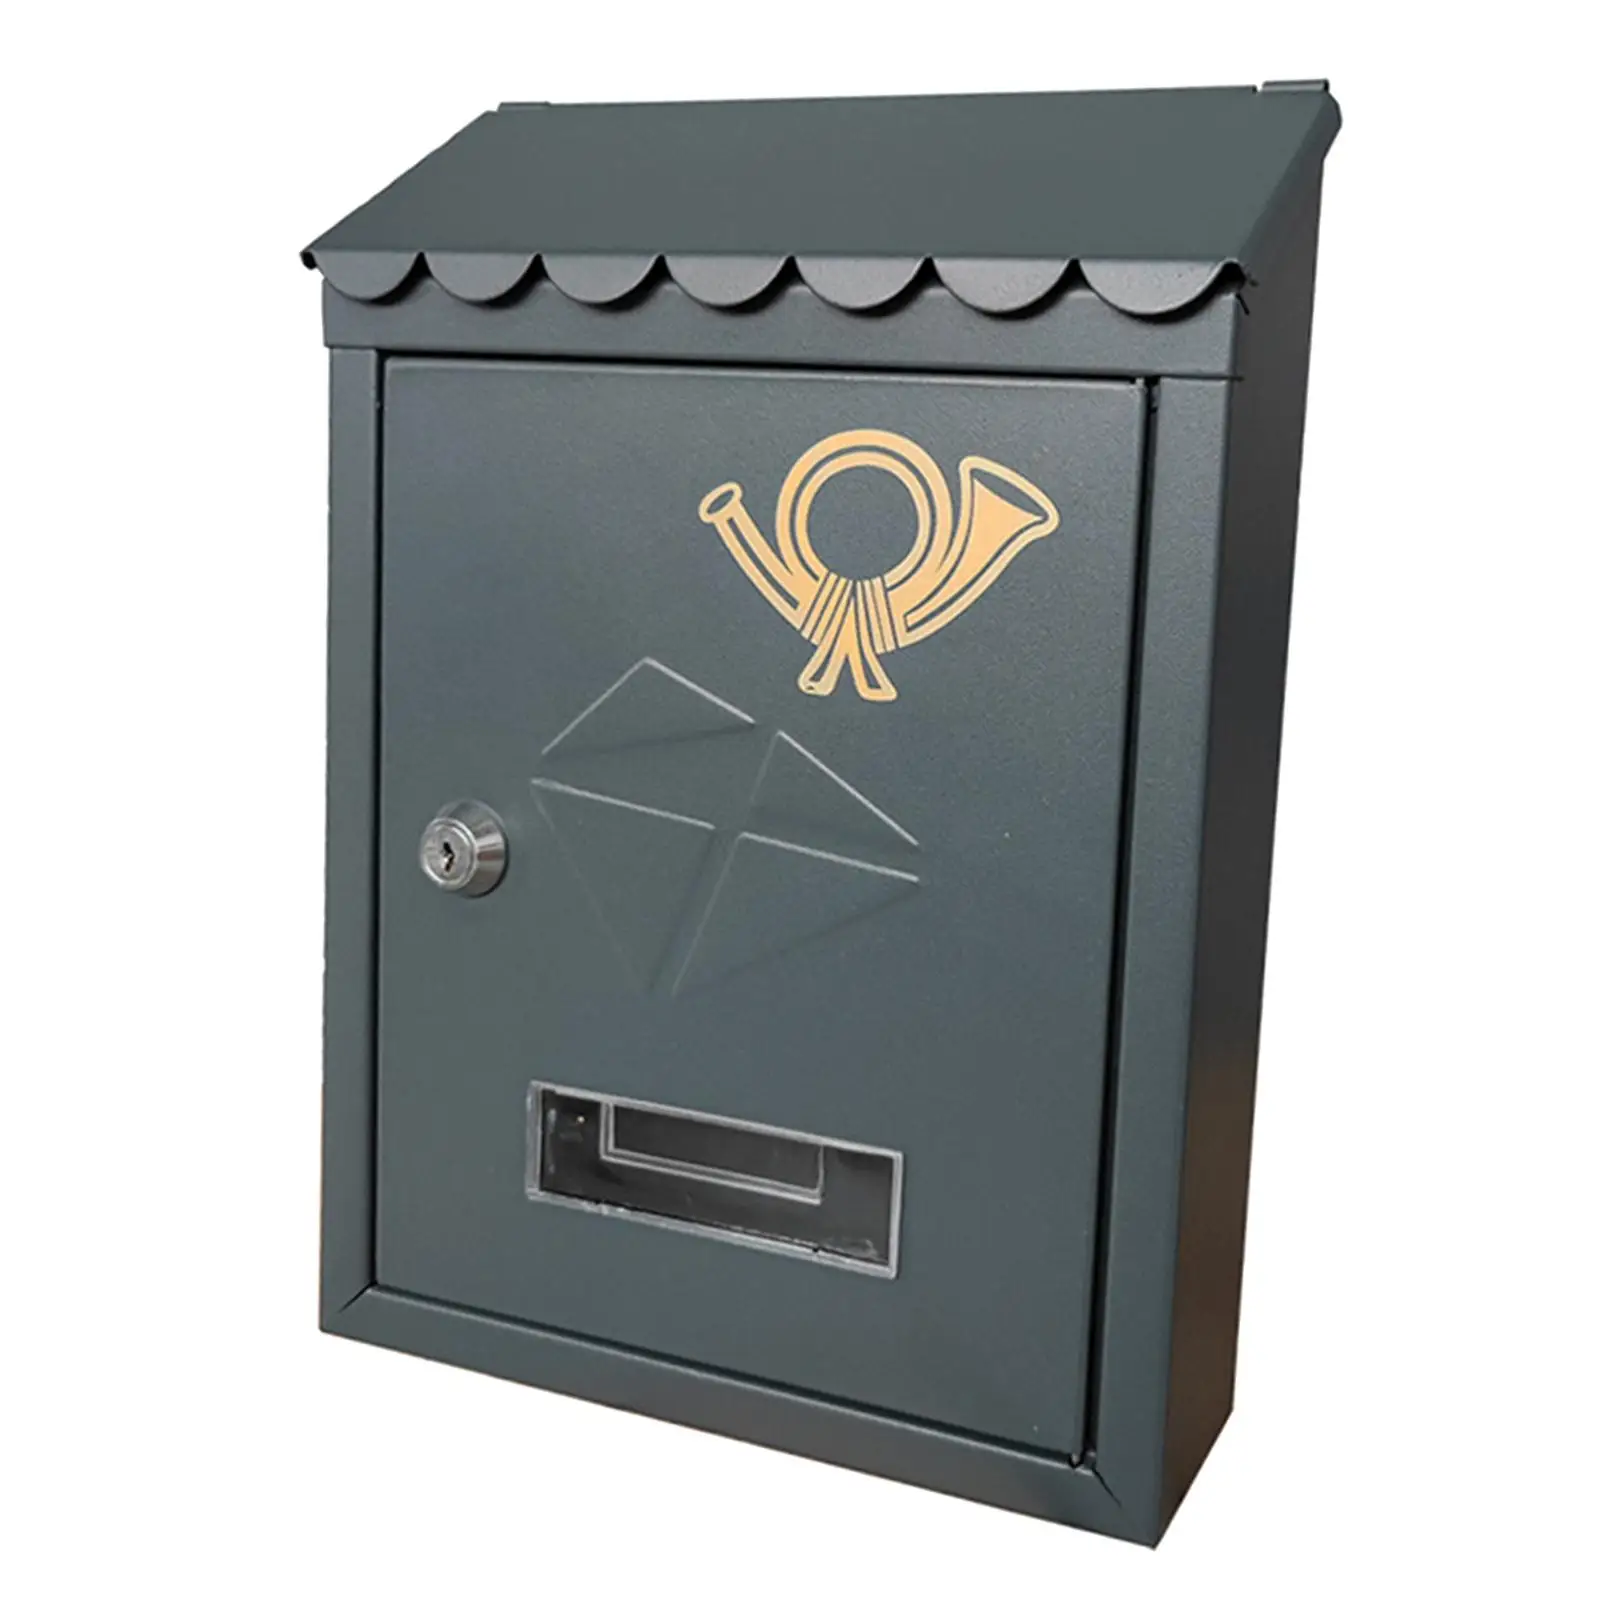 Wall Mount Mailbox Office Outside Business 21.5x7x30cm Lockable Decorative Letter Magazines Post Decorations Mailboxes